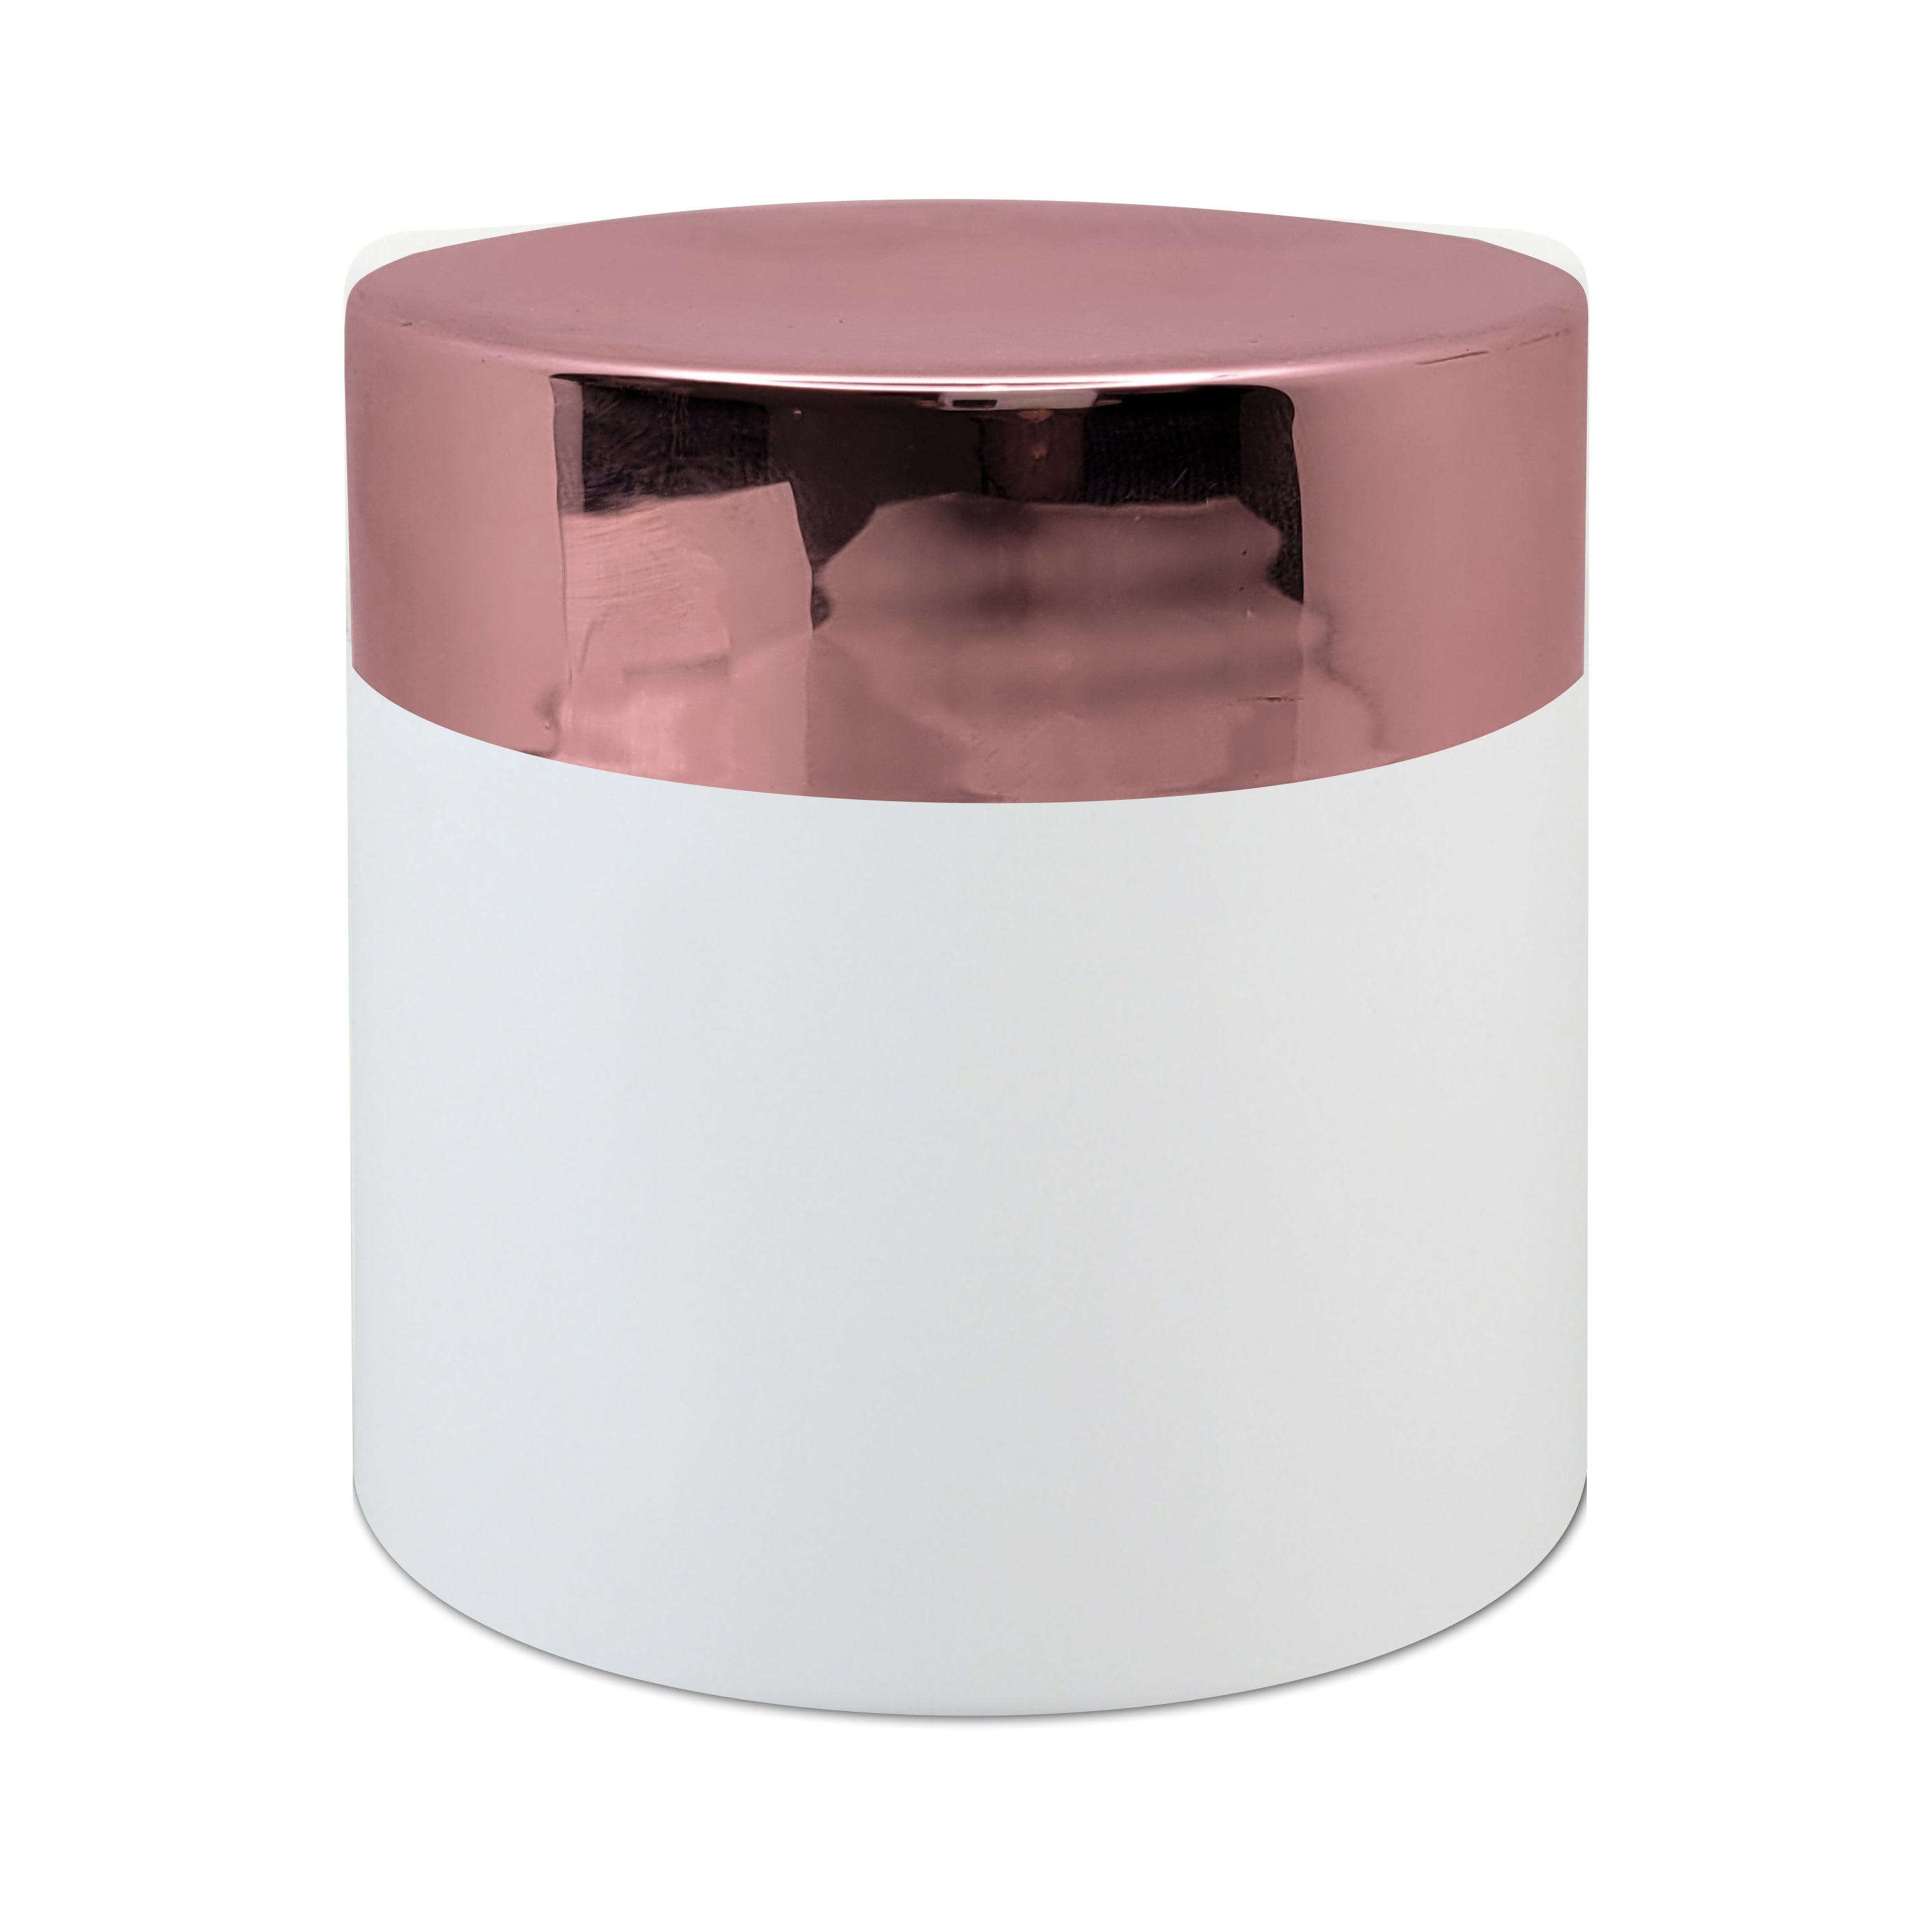 Empty White Color Cosmetics Jar with Rose Gold Cap for Cream- 50gm, 100gm [ZMJ16]